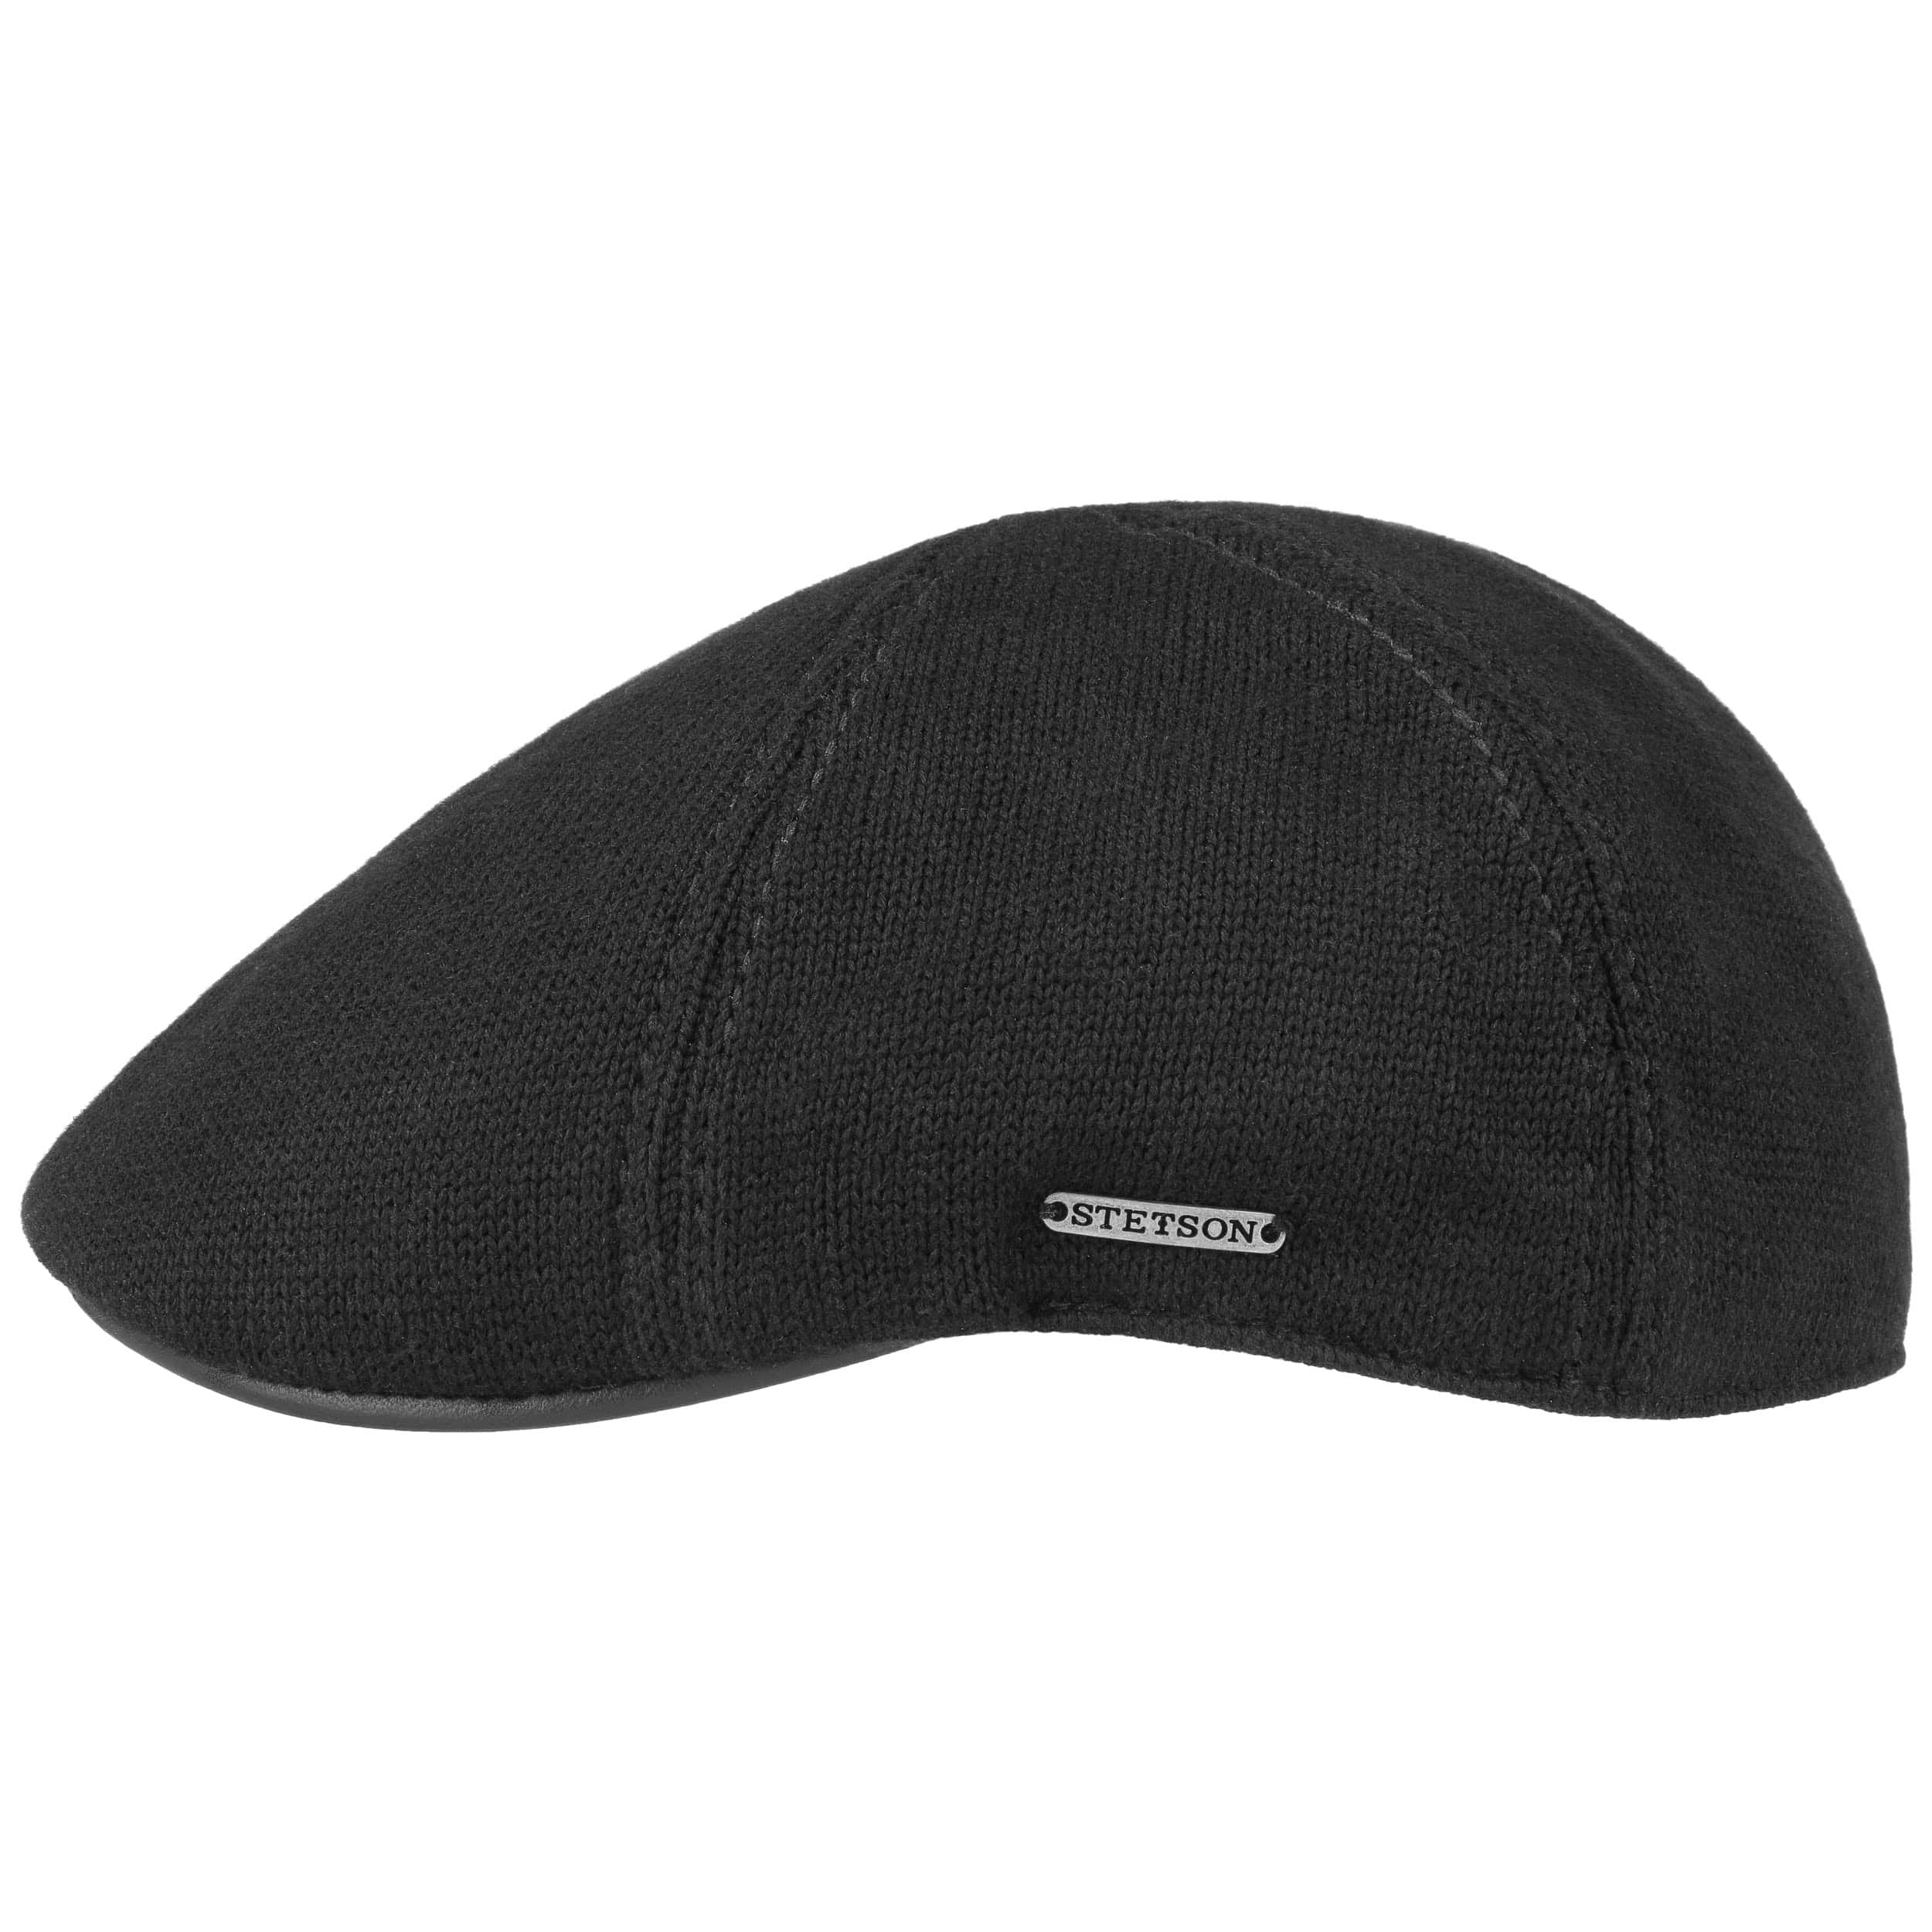 Muskegon Gatsby Cap by Stetson - 59,00